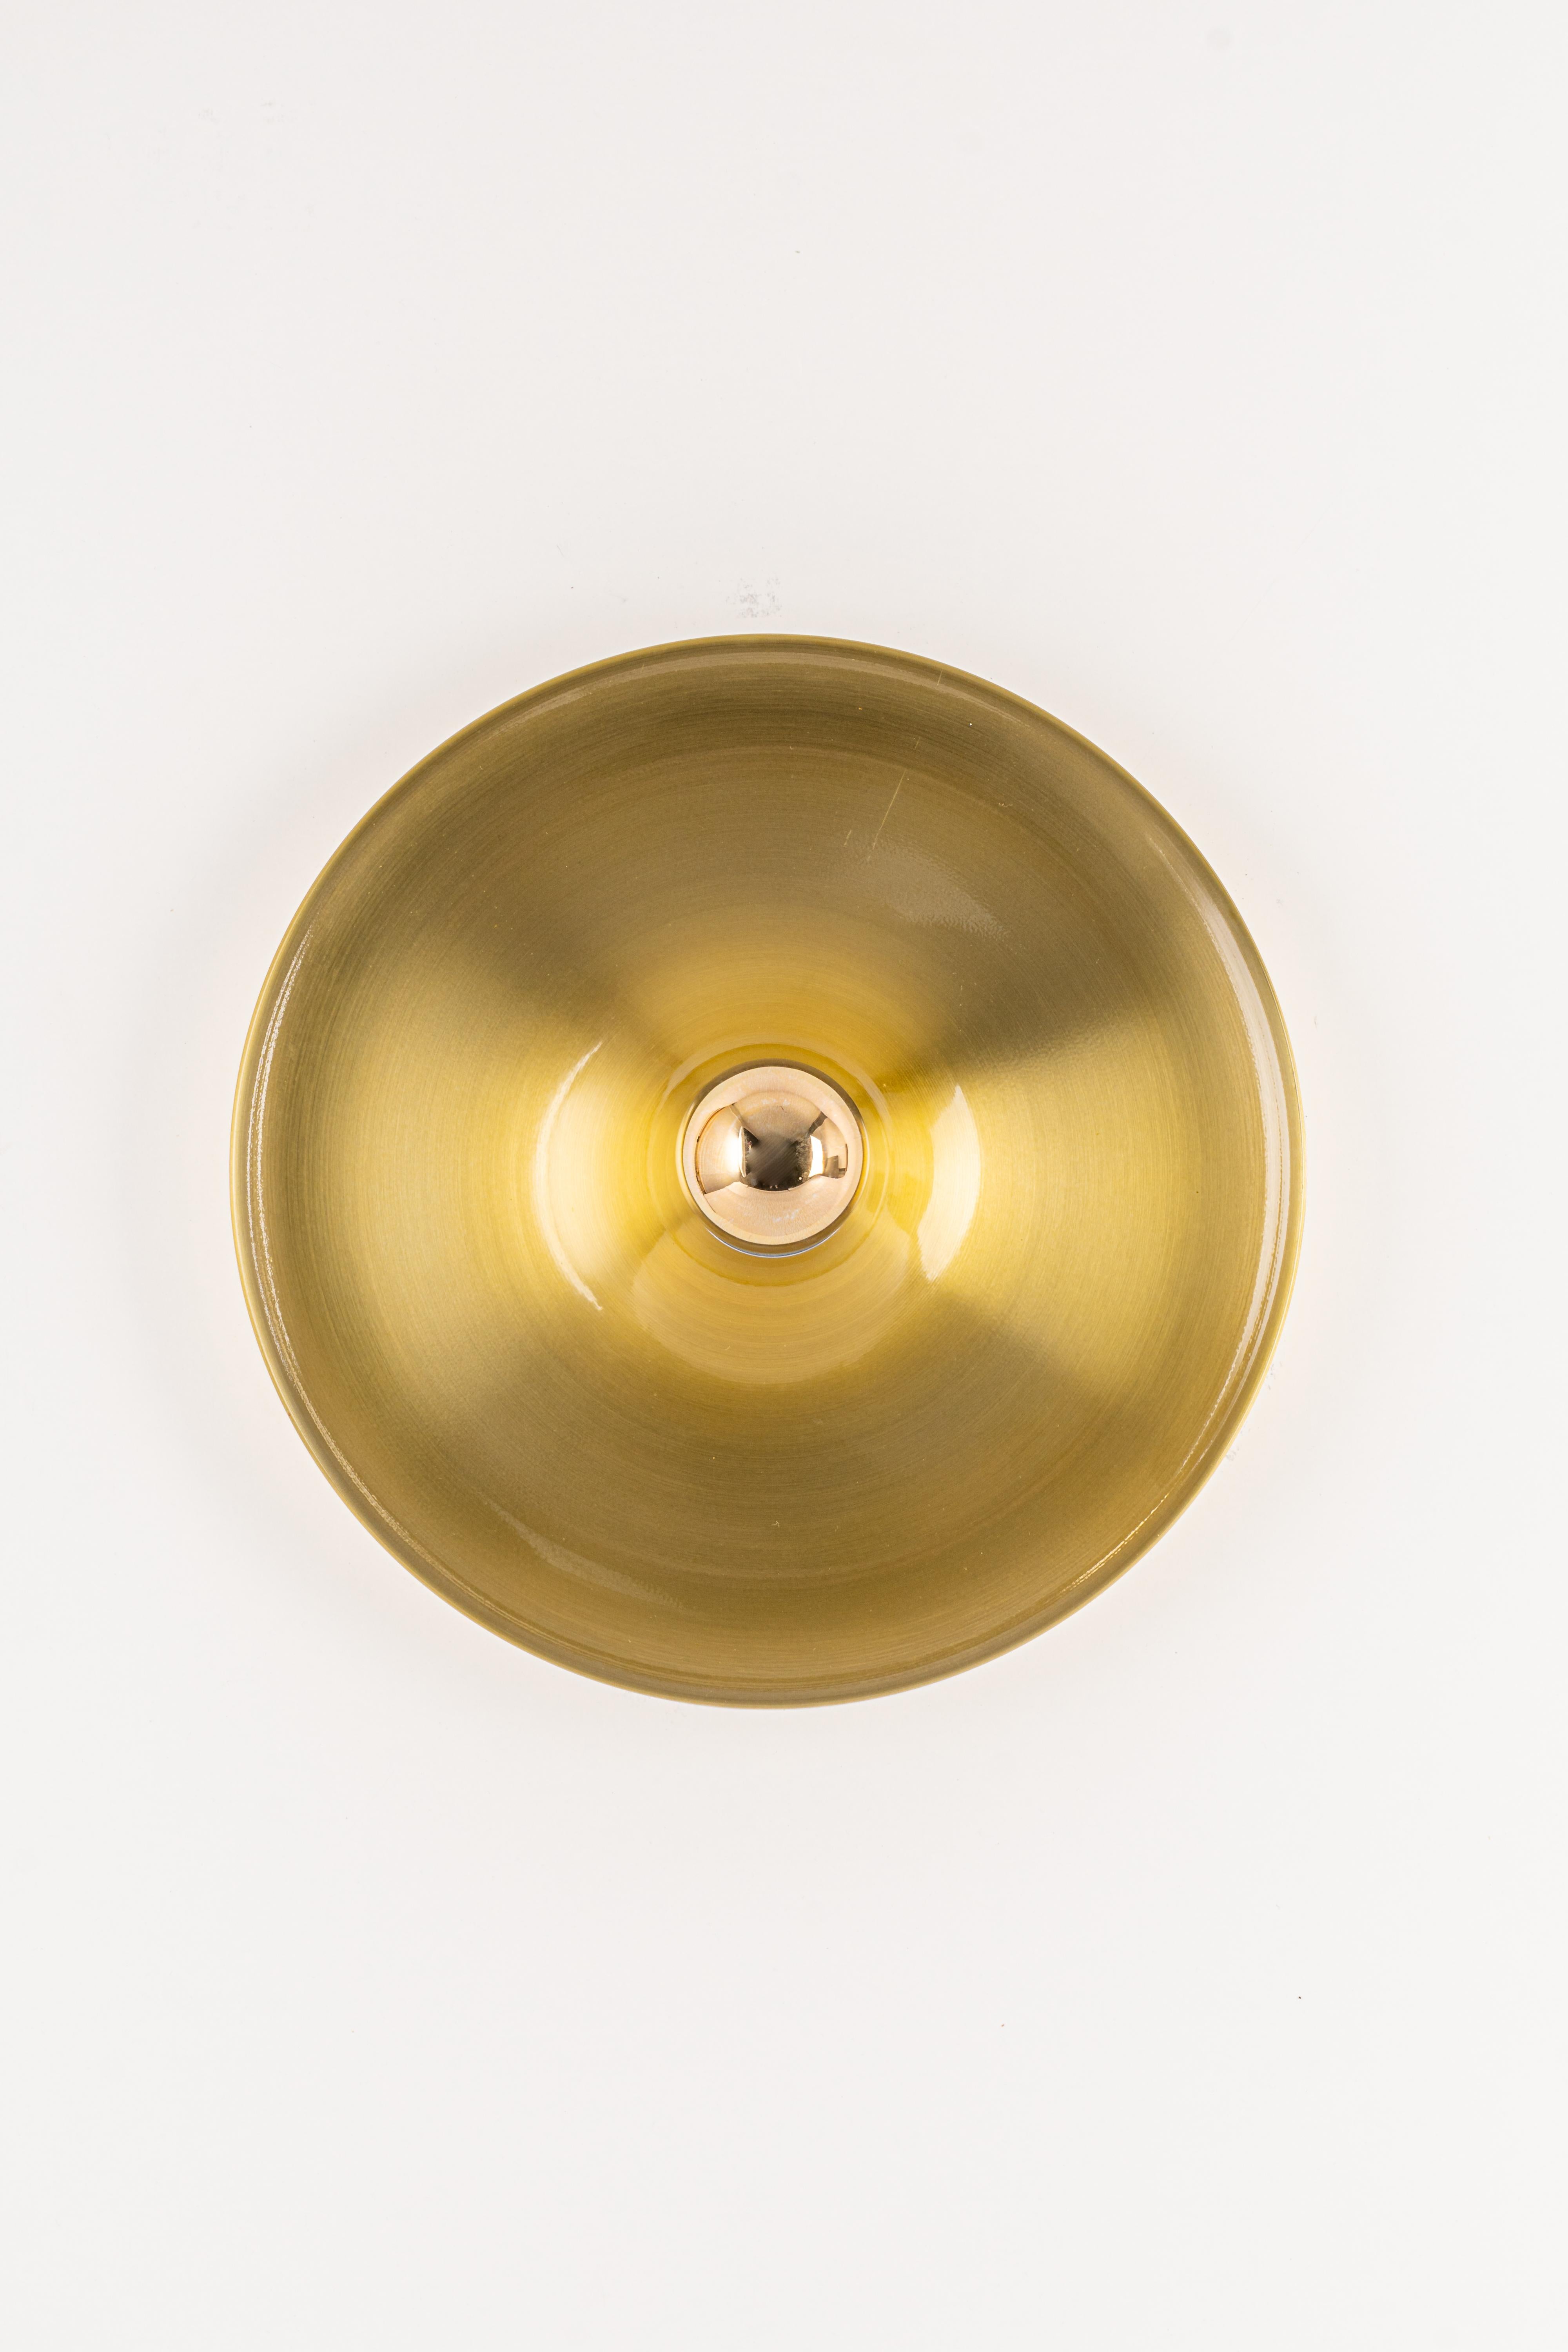 Midcentury Disc Wall Light, Germany, 1970s For Sale 1